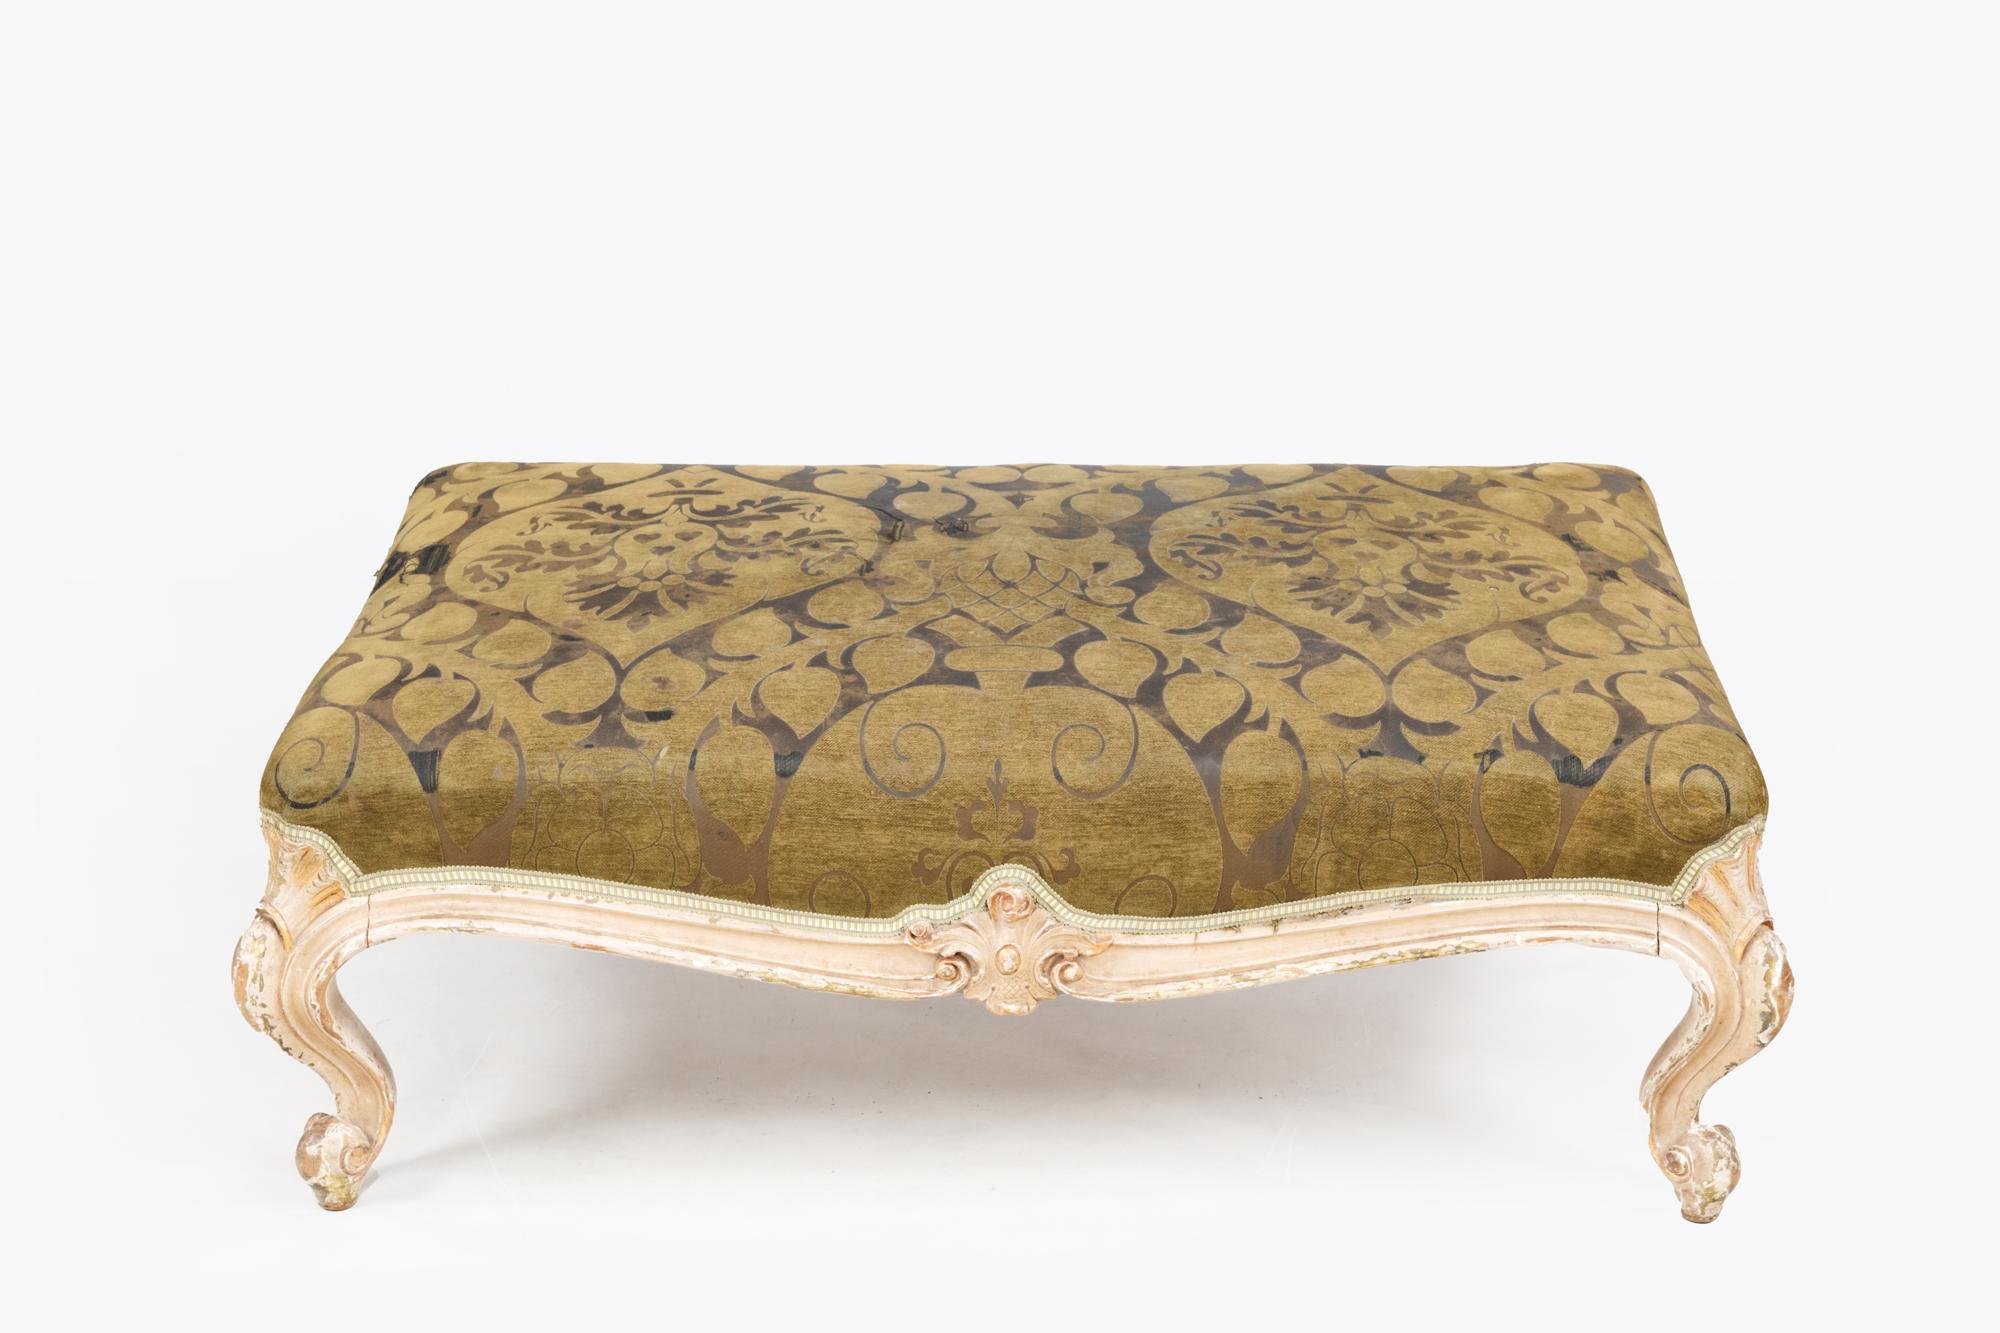 Late 18th Century Giltwood Central Ottoman In Good Condition For Sale In Dublin 8, IE